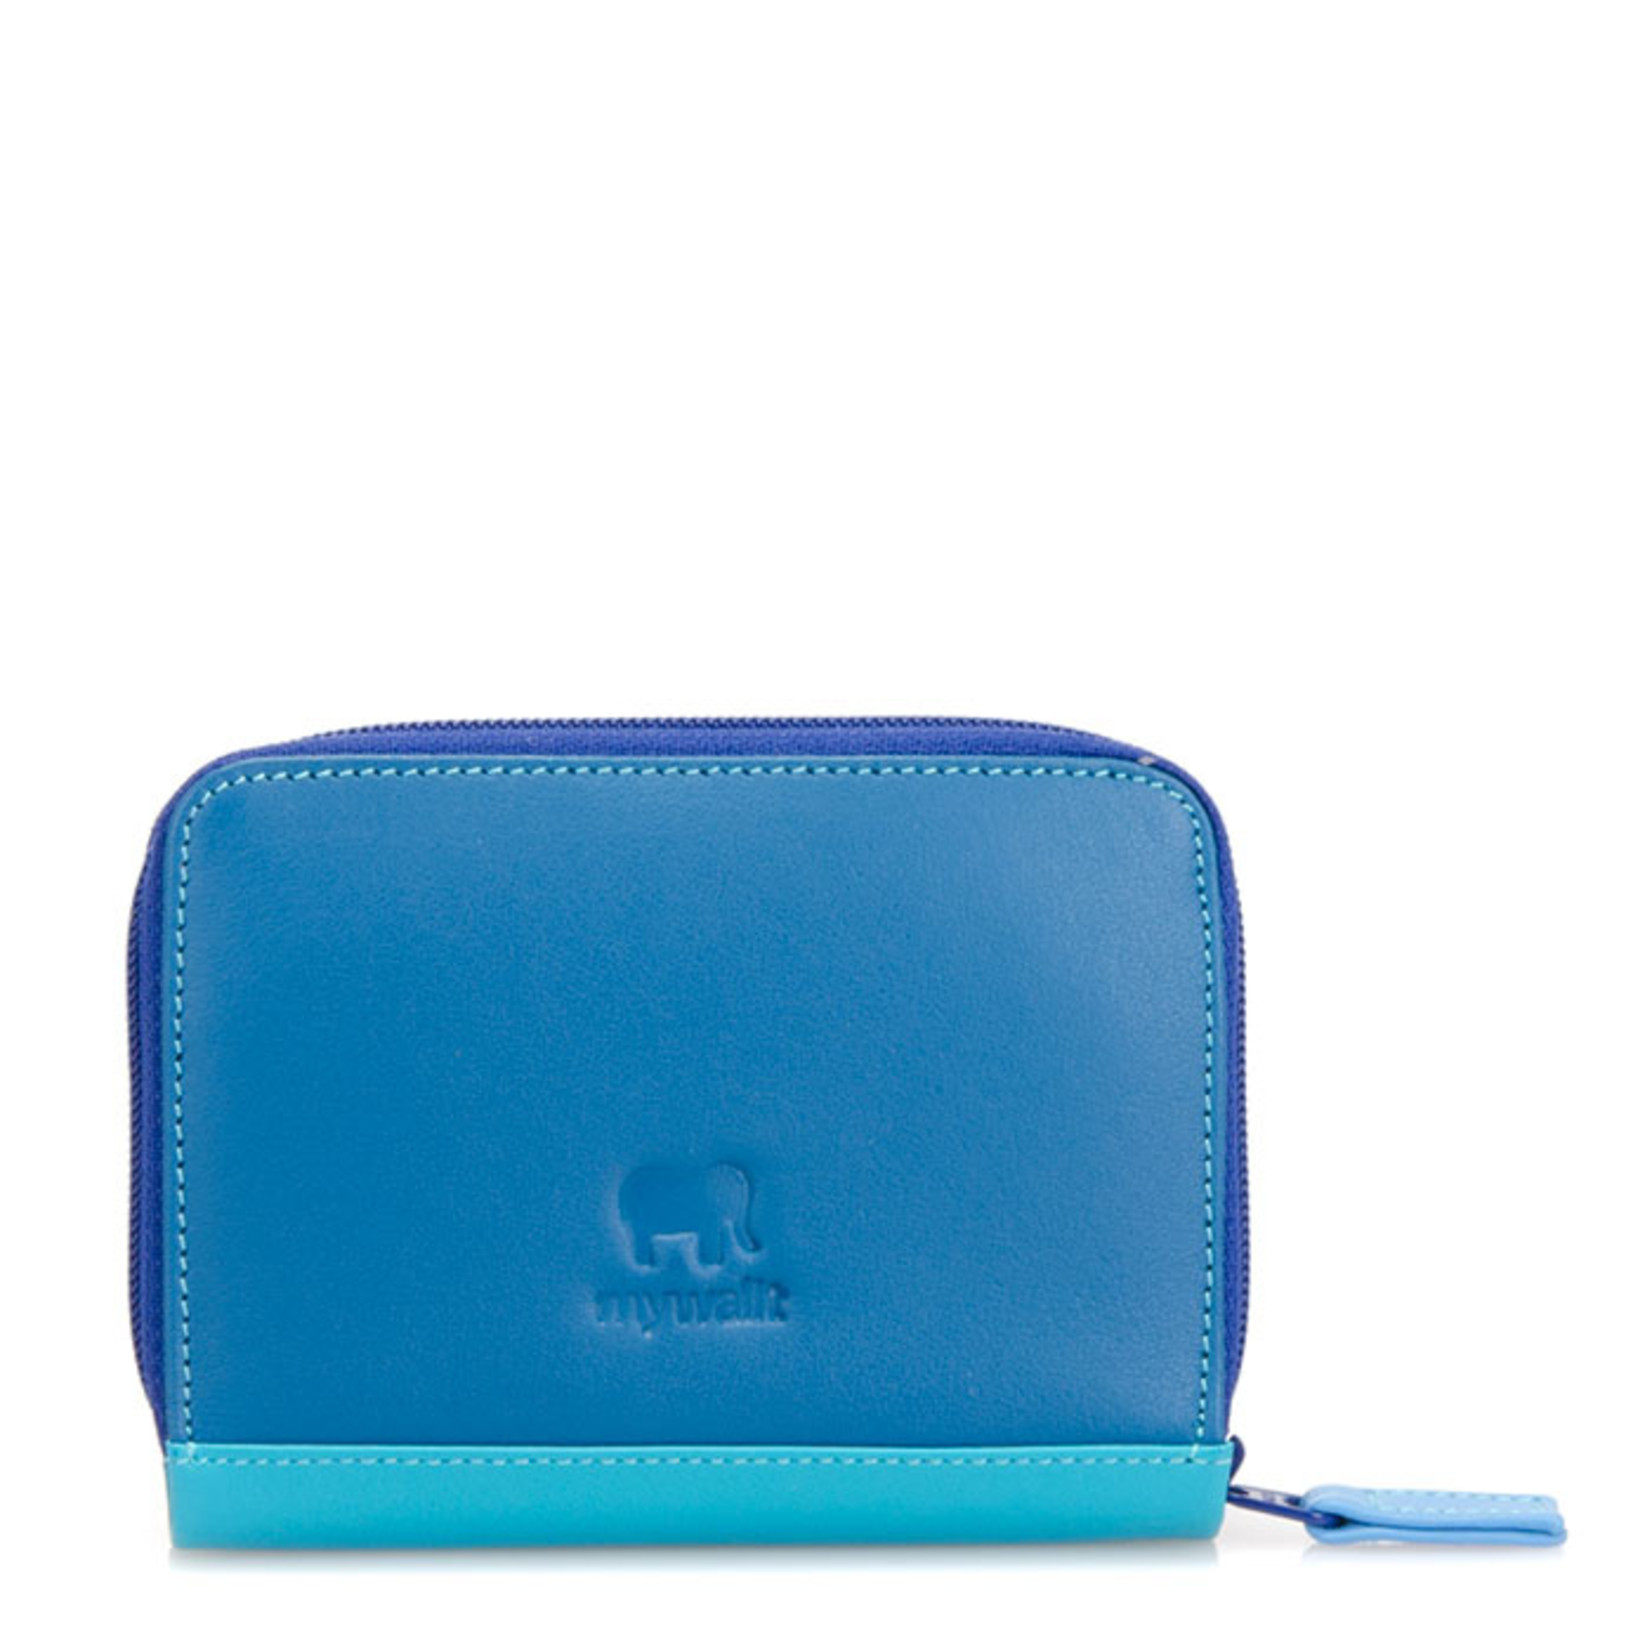 Mywalit Mywalit Zipped Credit Card Holder